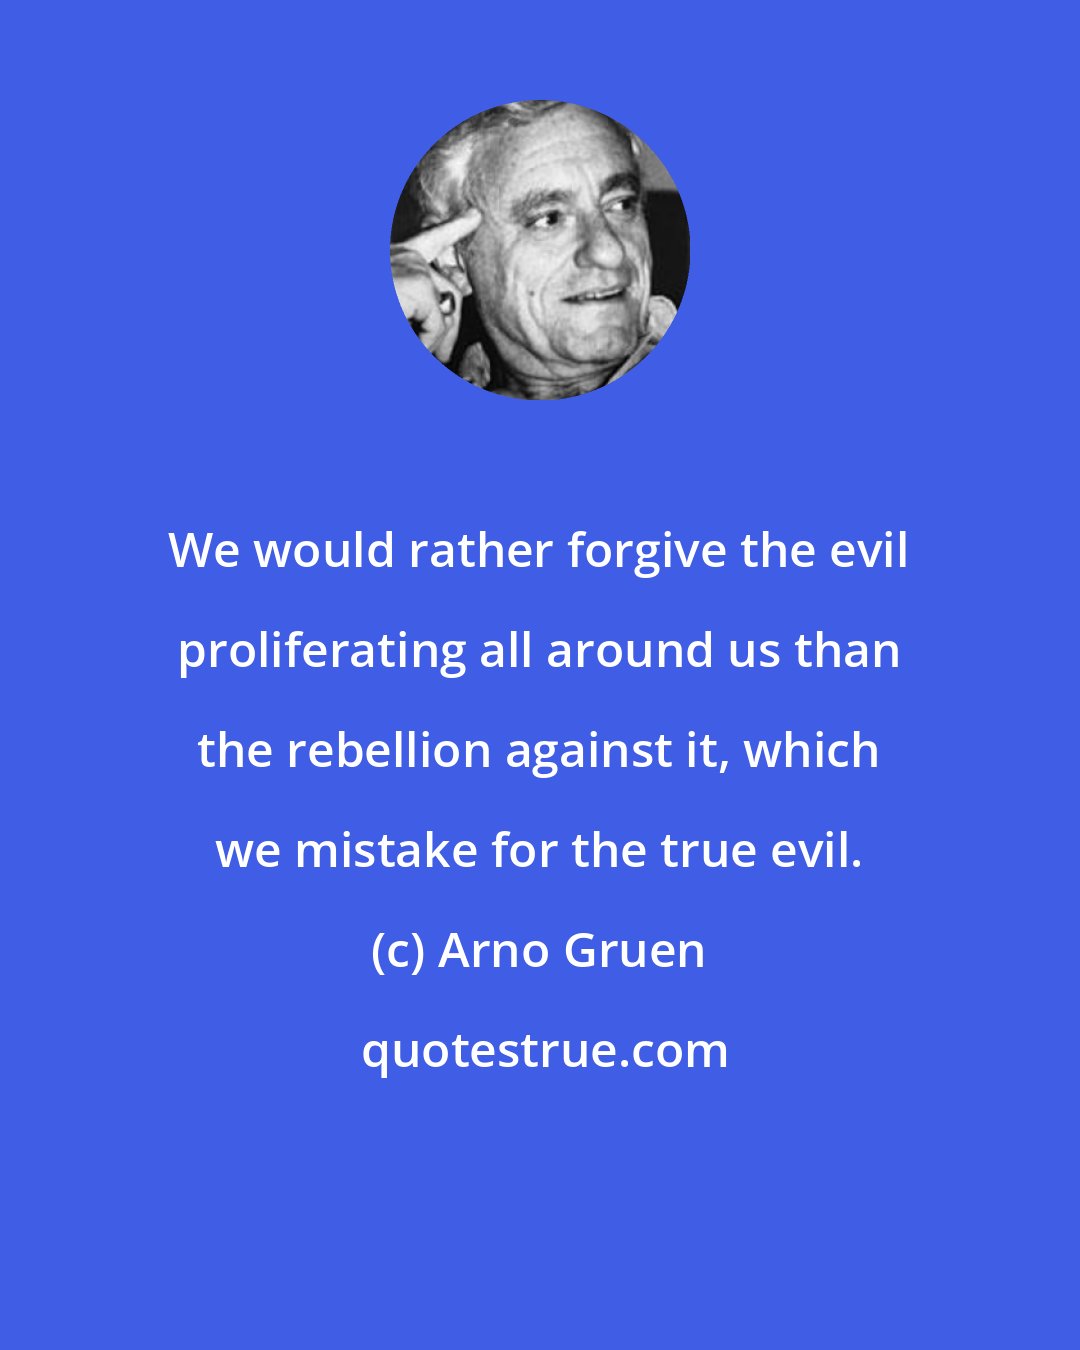 Arno Gruen: We would rather forgive the evil proliferating all around us than the rebellion against it, which we mistake for the true evil.